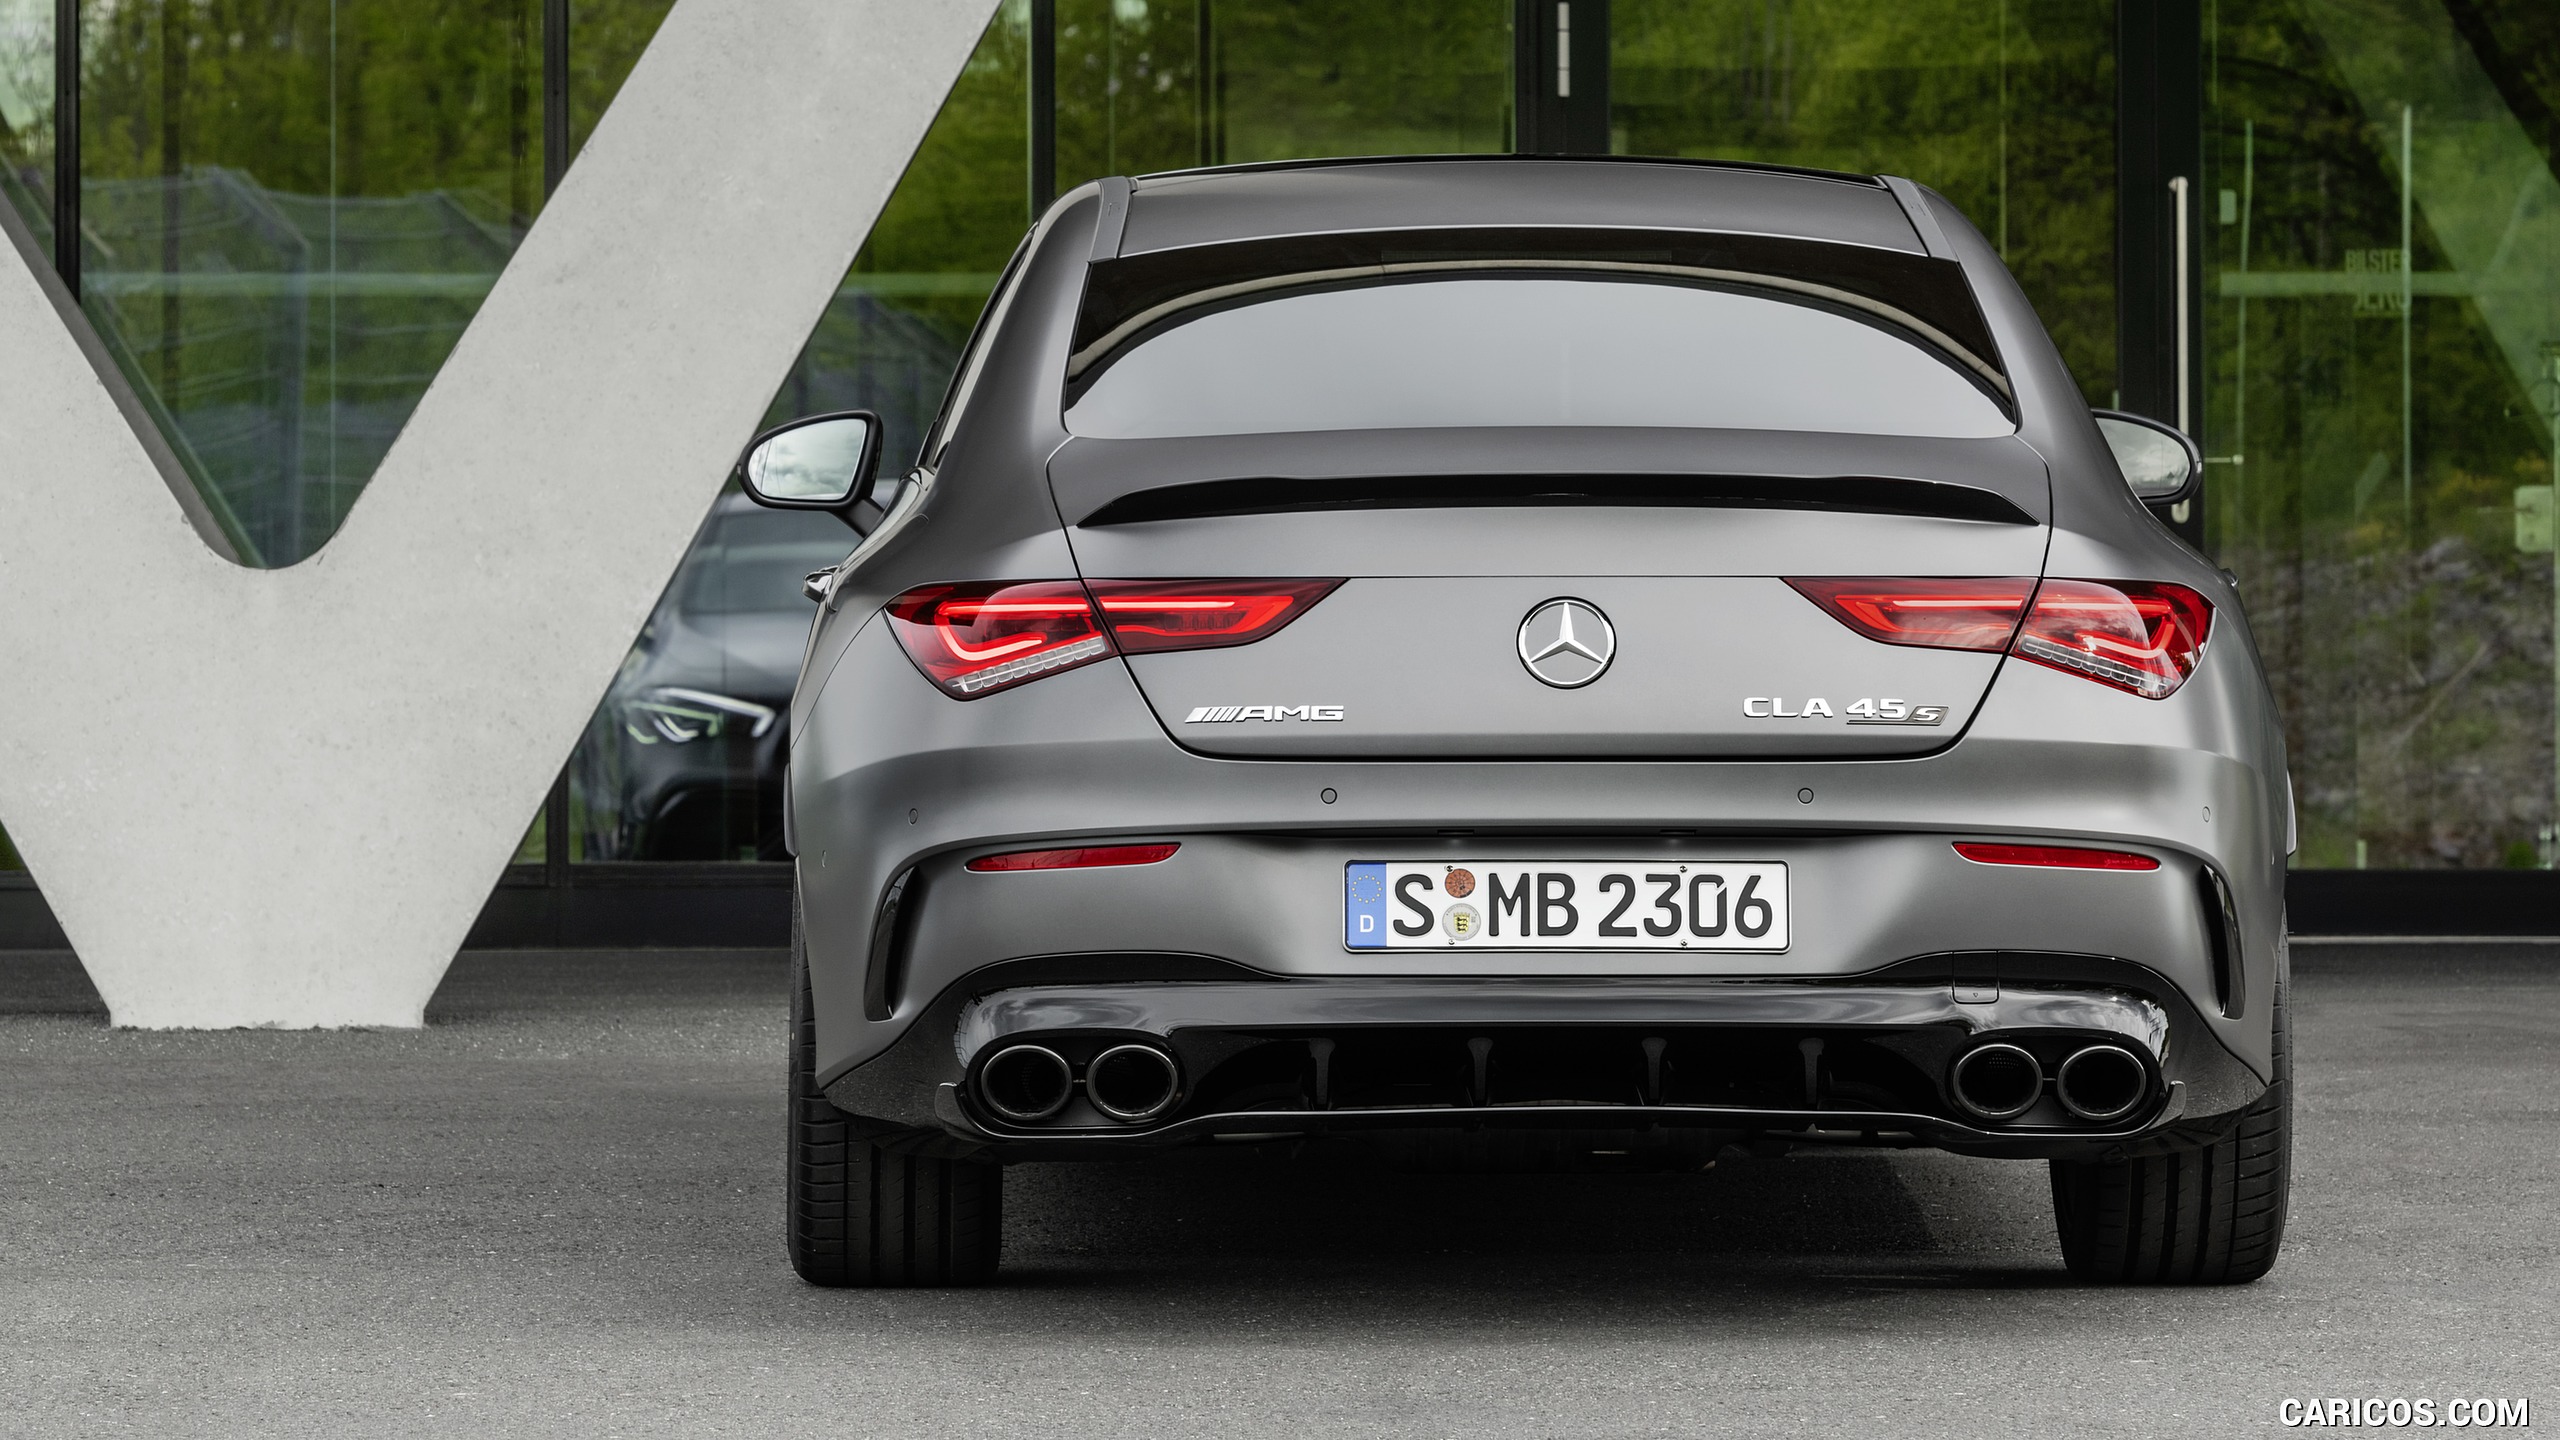 2020 Mercedes-AMG CLA 45 S 4MATIC+ - Rear, #24 of 159